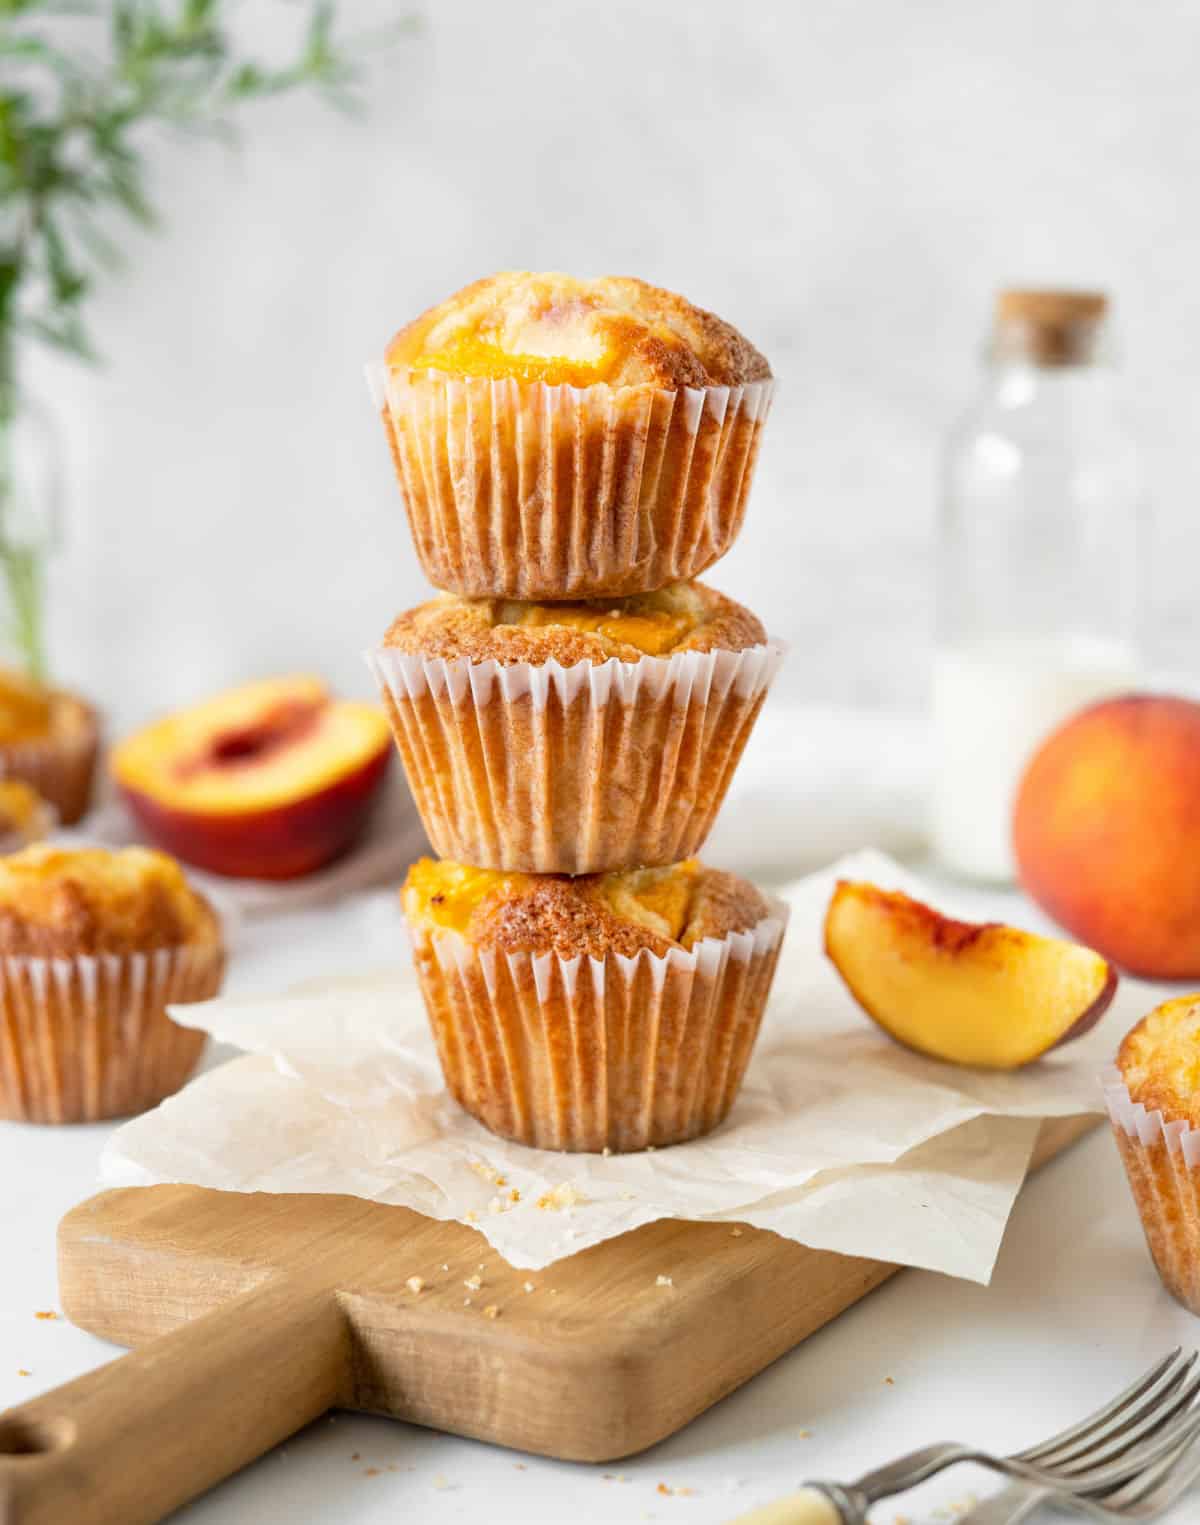 A stack of three peach muffins on beige parchment paper, greyish background, fresh peaches around.